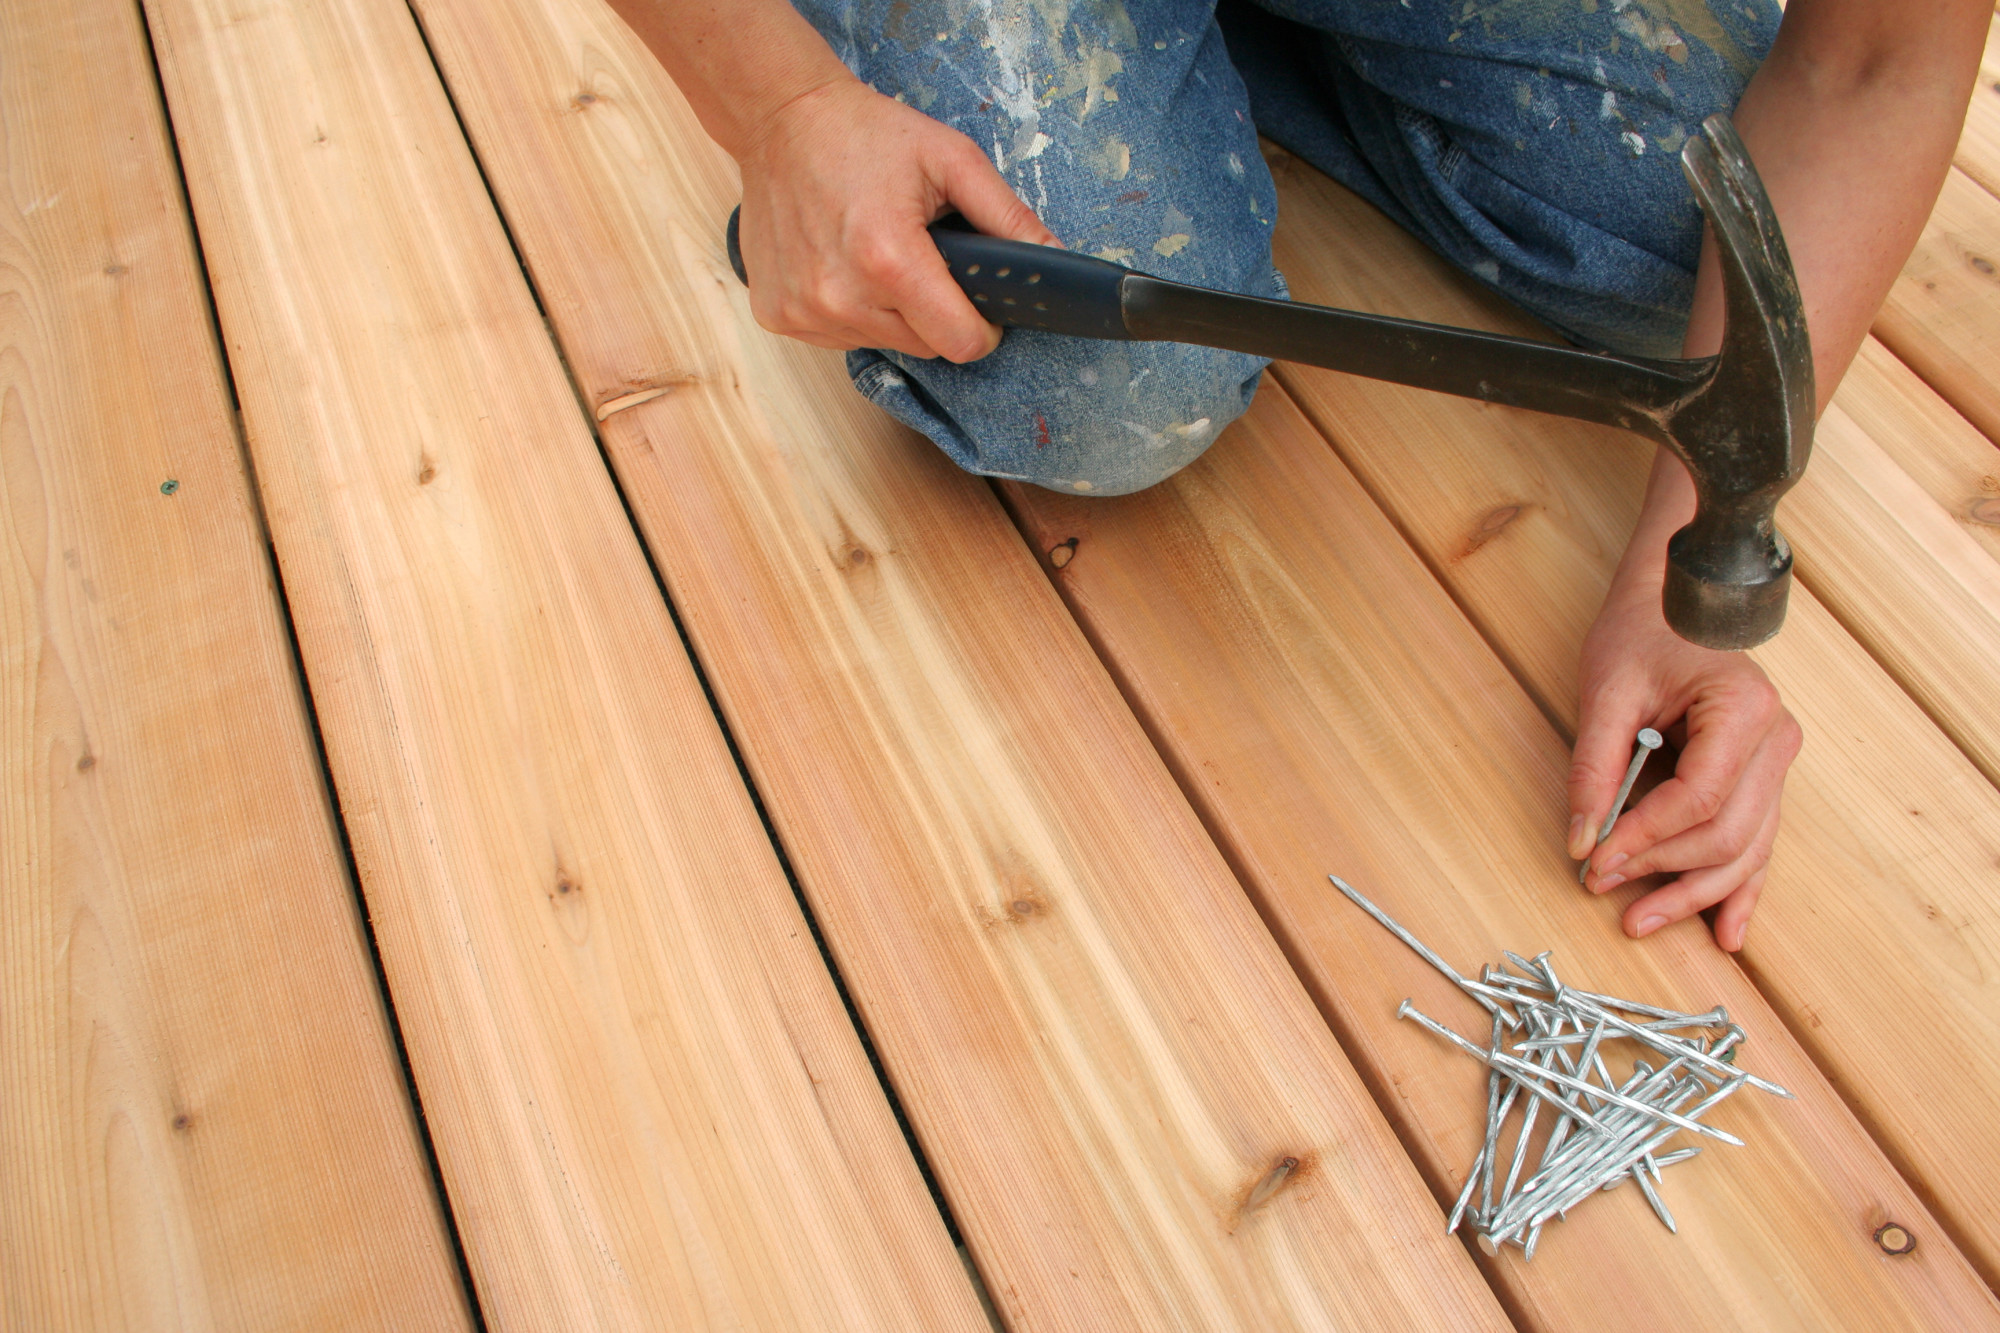 Building Permit For Your Renovation, Do I Need A Permit To Install Laminate Flooring